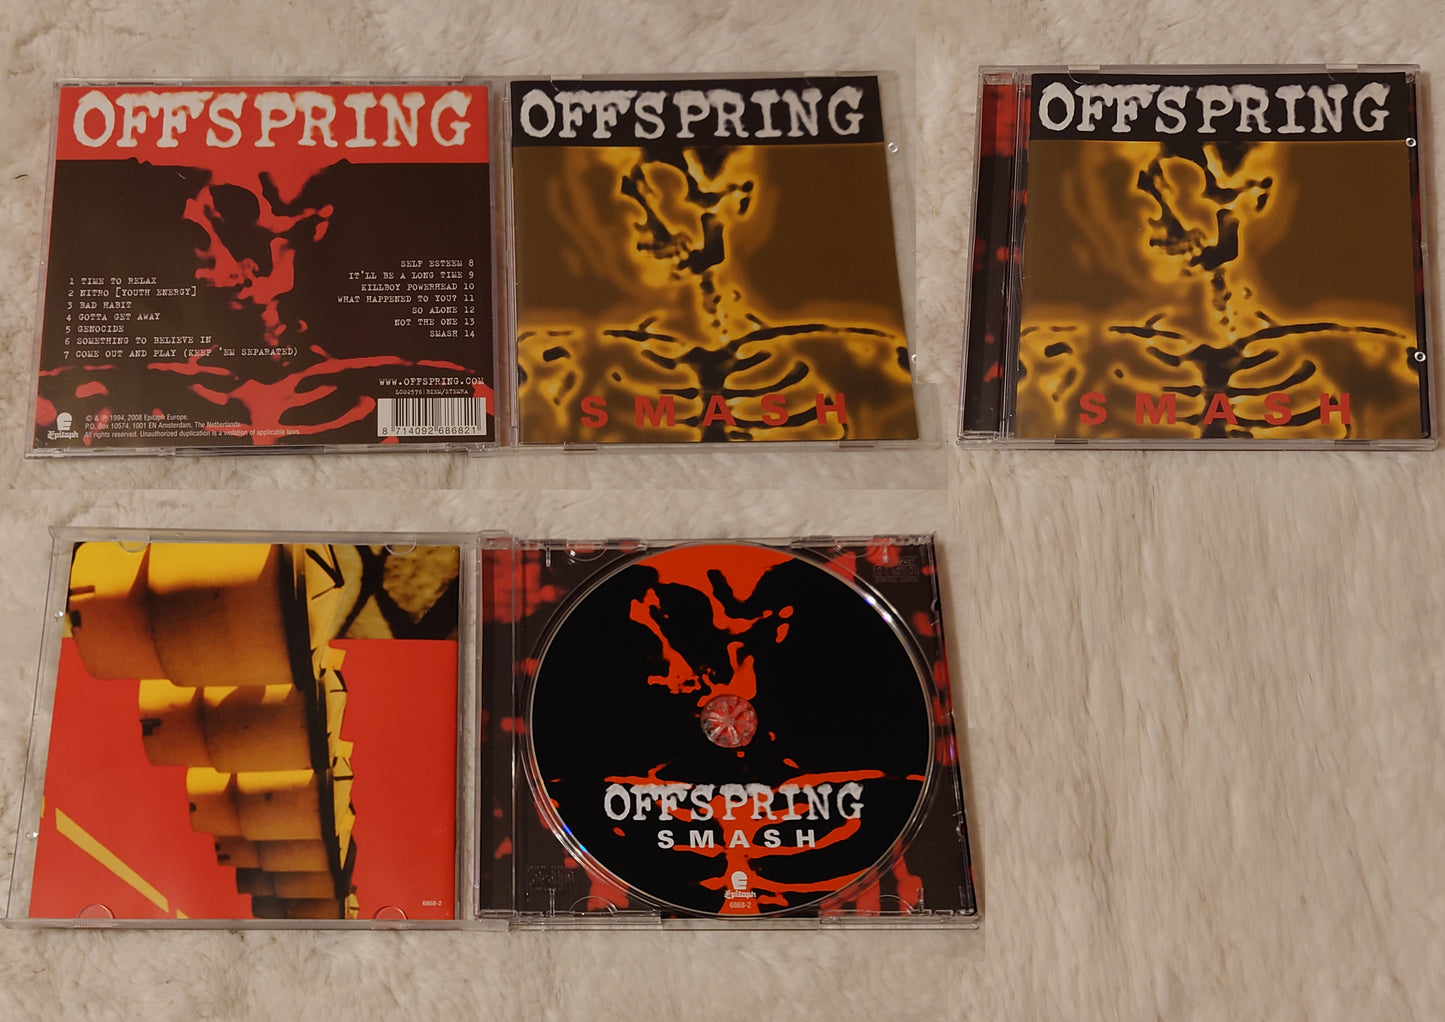 CD albums #2 - Korn, Linkin Park, Metallica, The Offspring, Panic at the Disco, Queens of the Stone Age